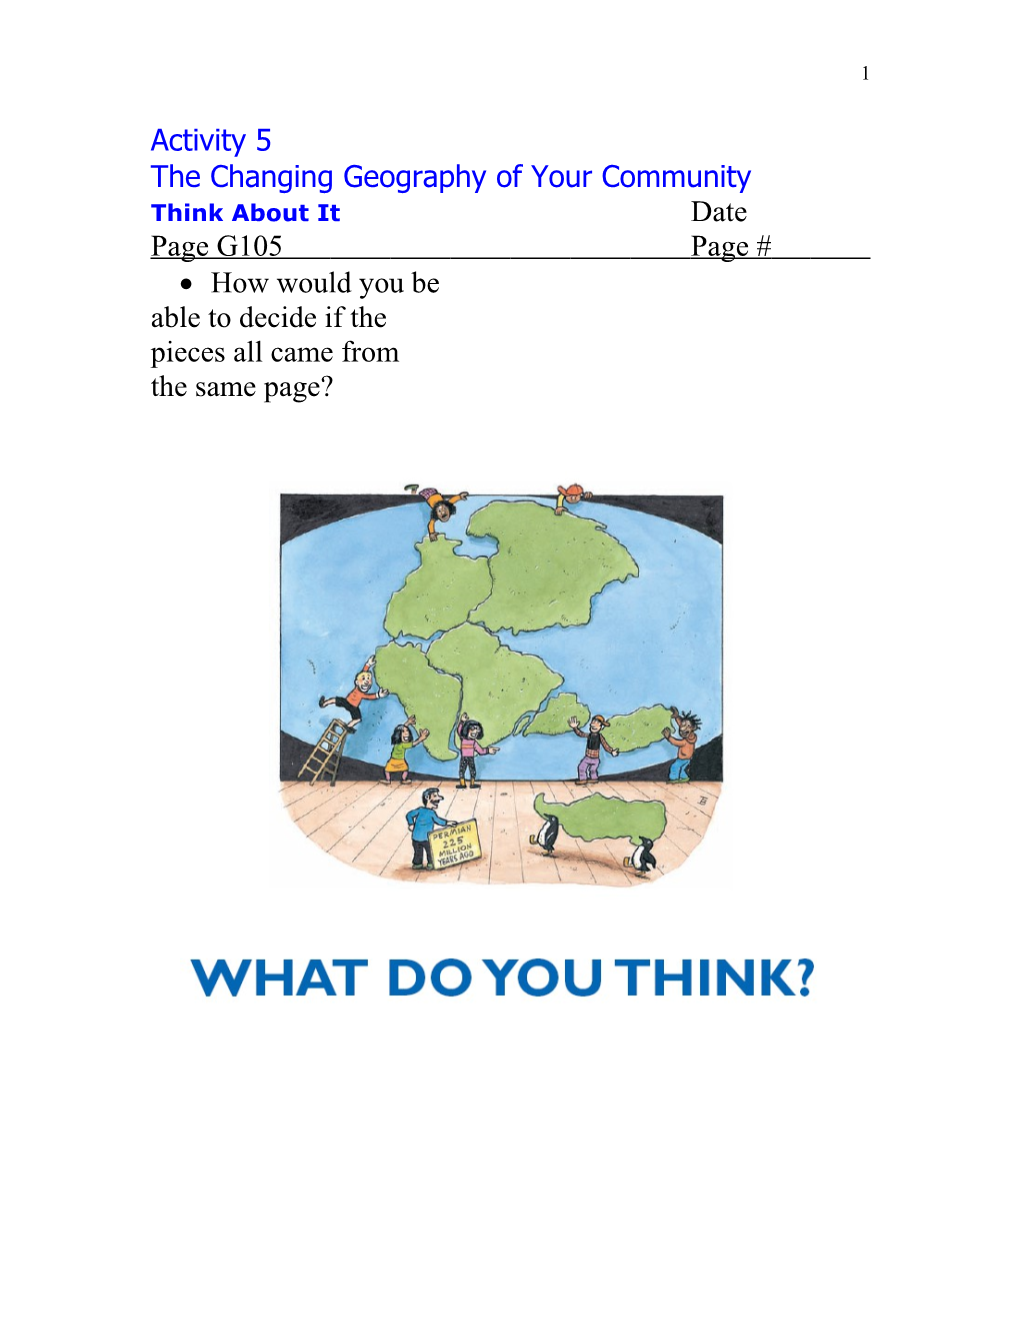 The Changing Geography of Your Community